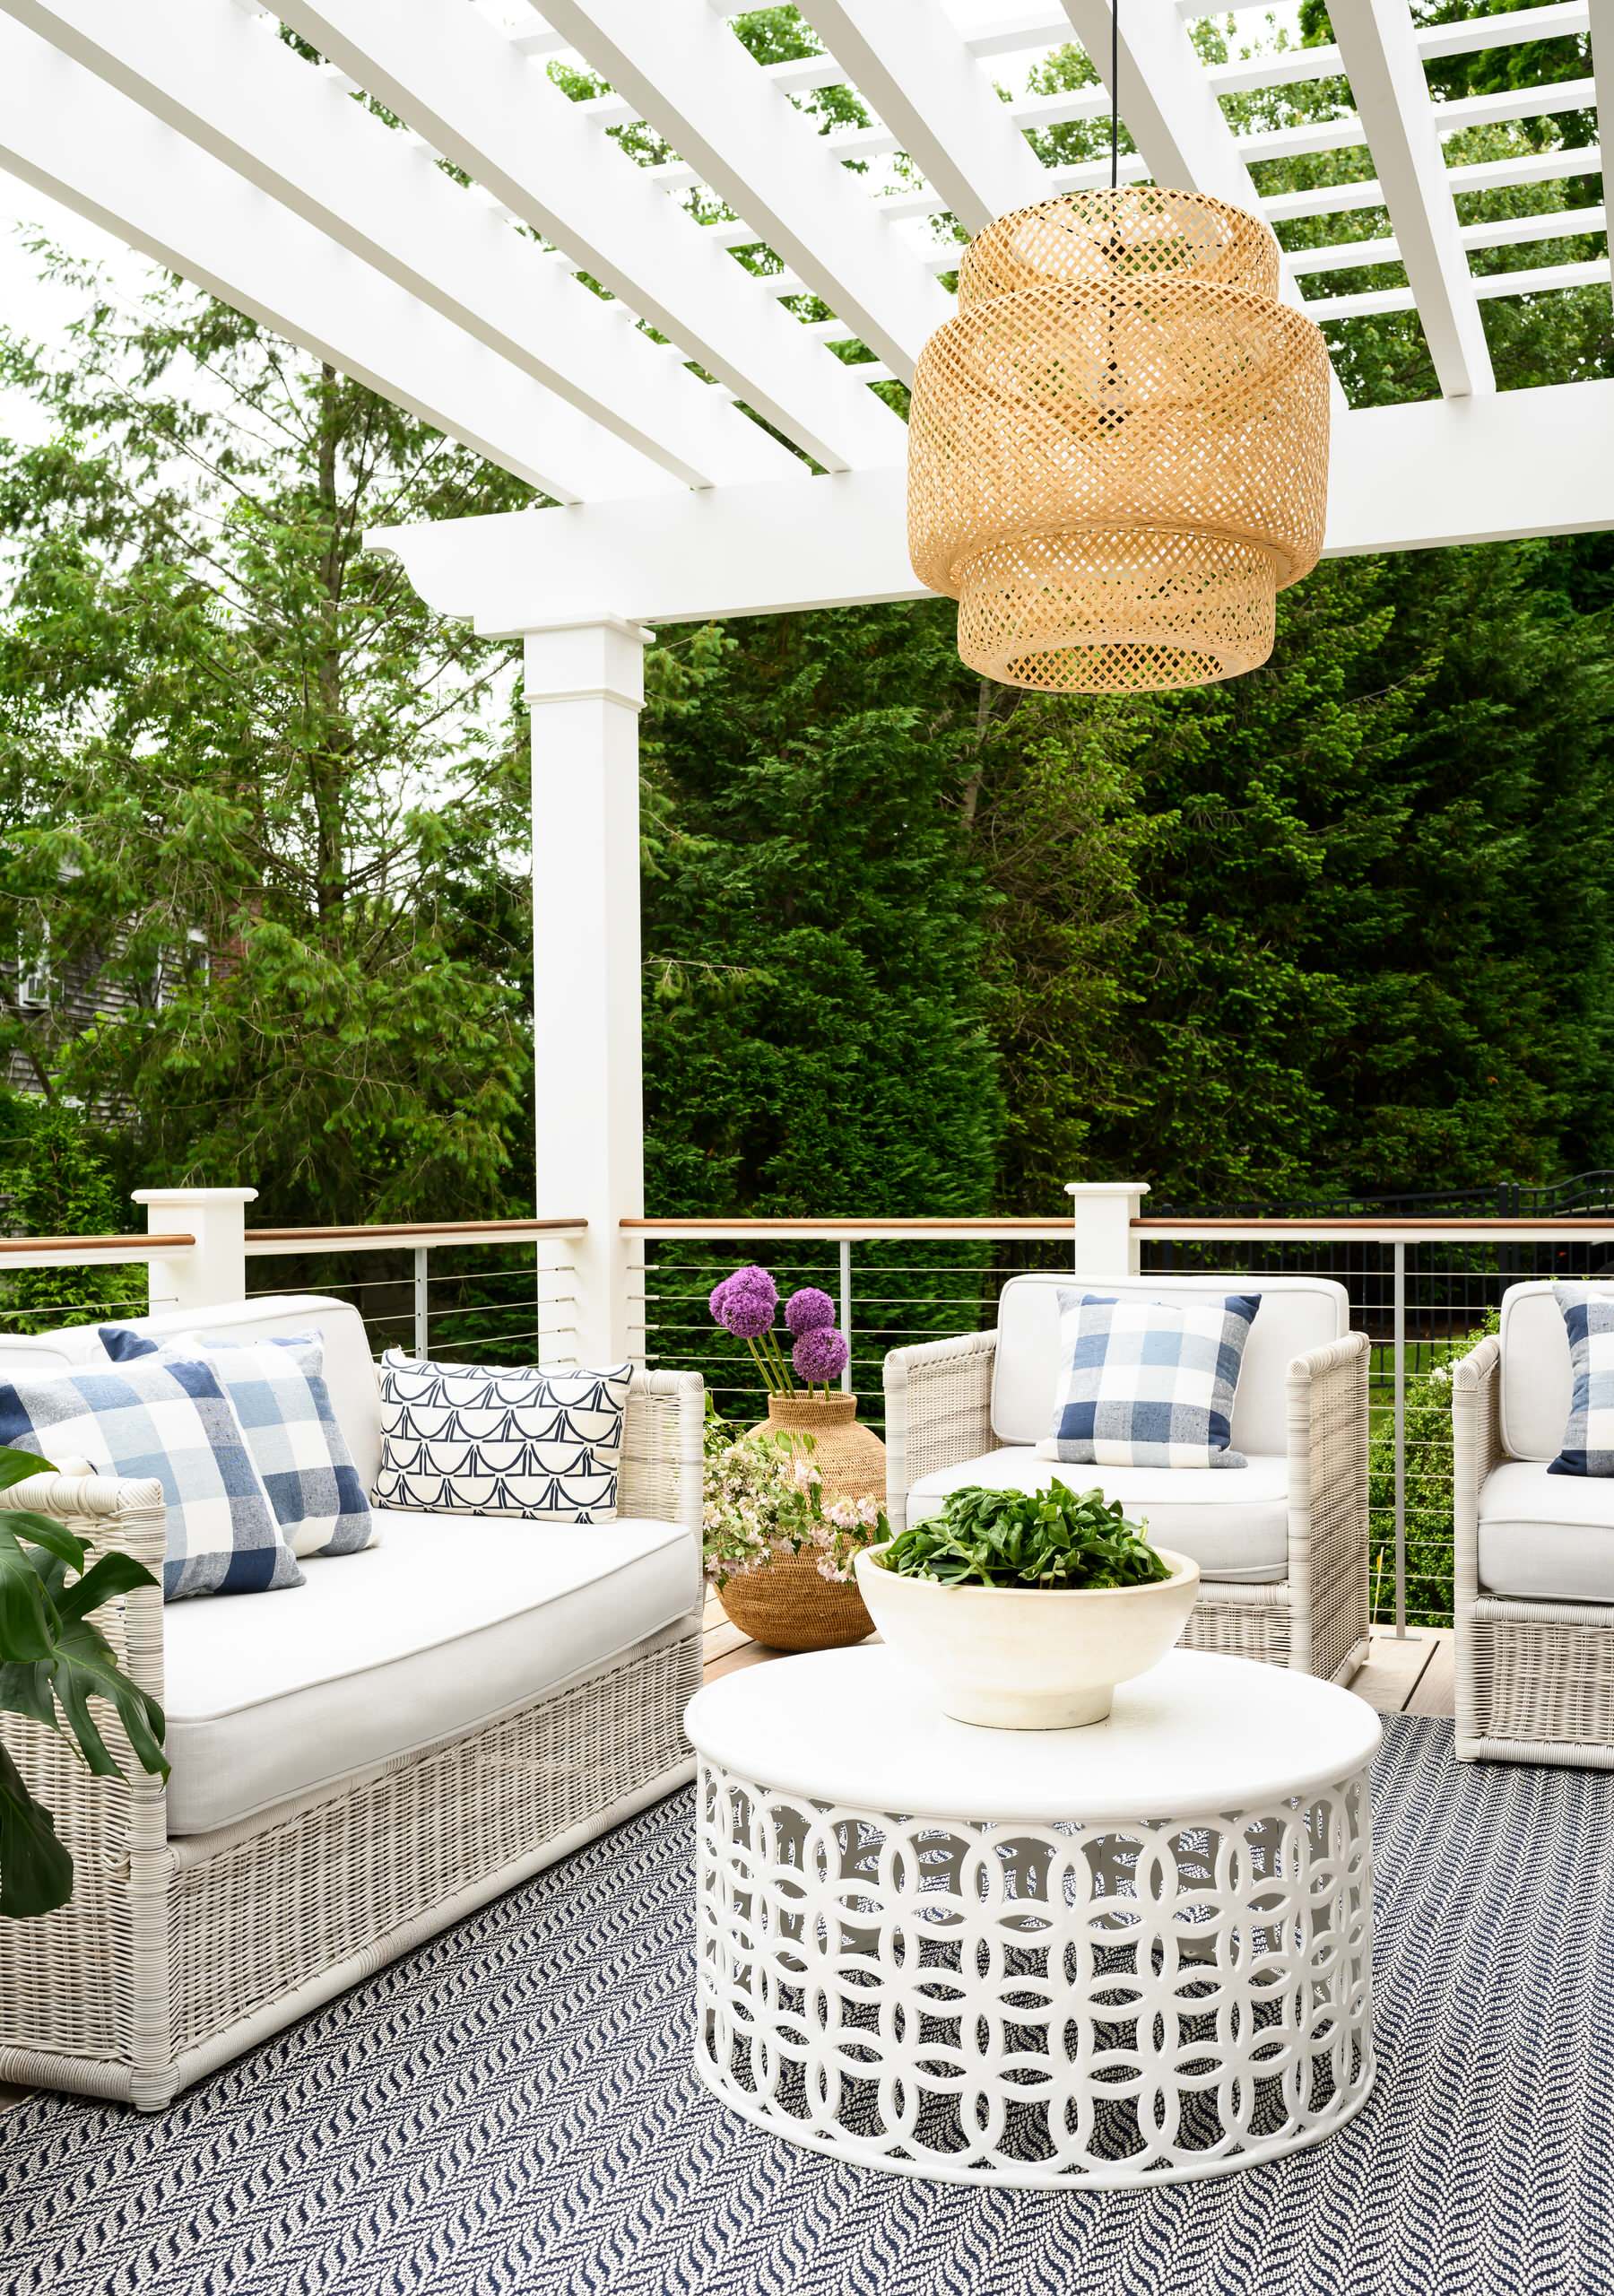 Orchard Lane - Entertaining-Made-Easy Outdoor Edition